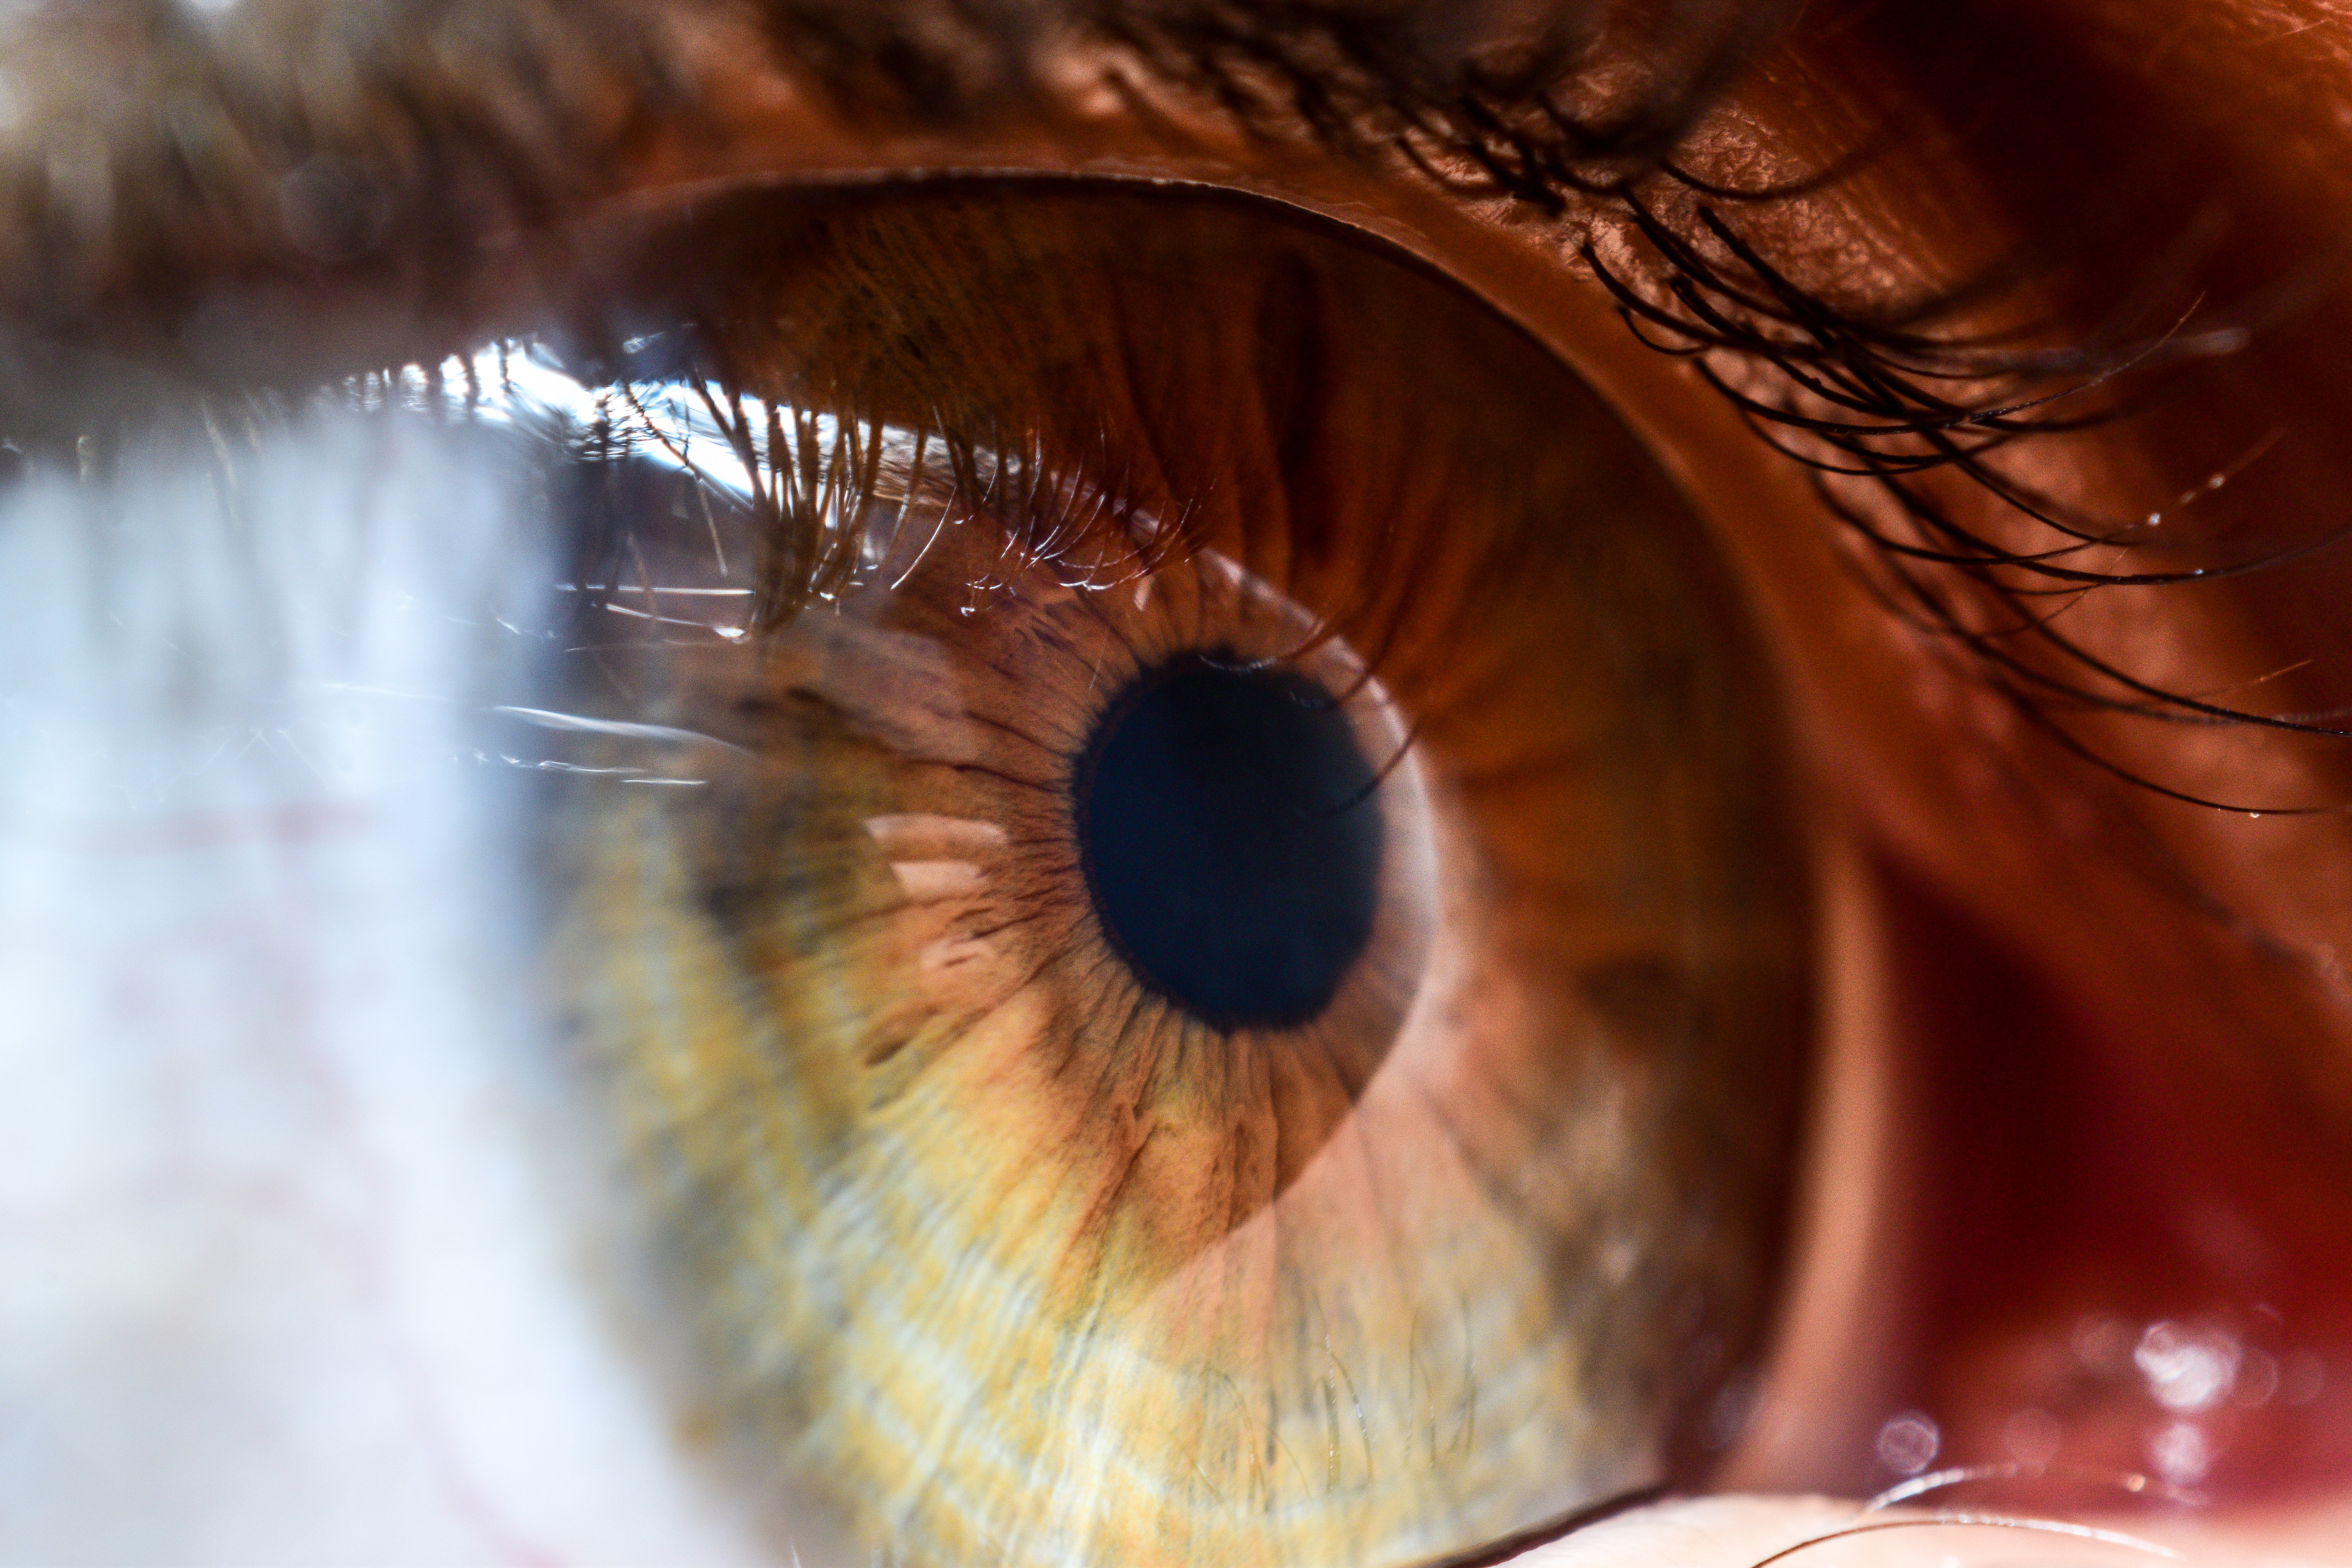 Transcorneal electrical stimulation, developed to treat eye conditions, may also be useful in combating depression and dementia, Hong Kong researchers say. Photo: Getty images